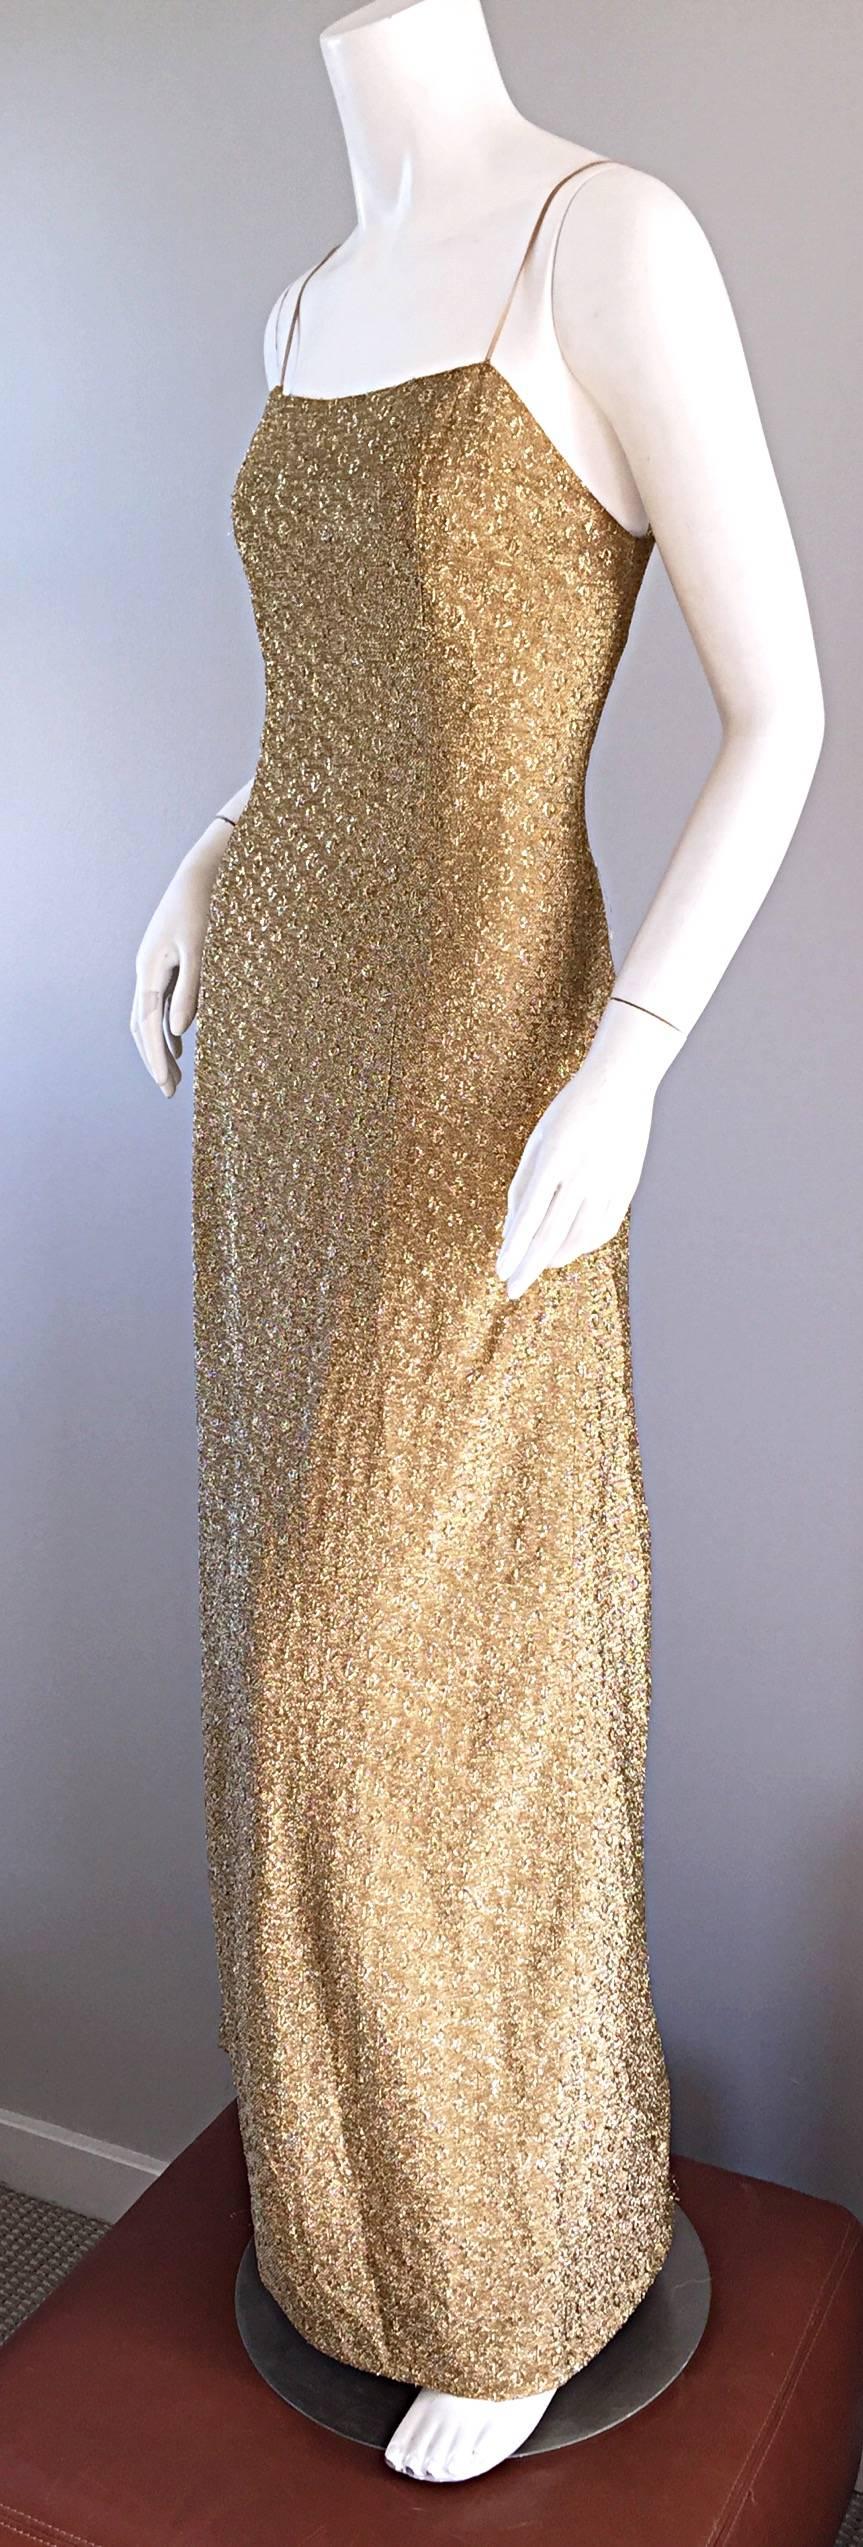 Absolutely amazing vintage GALANOS gold metallic 1970s dress!!! This gown is everything! Intricate gold silk metallic, hand-sewn. Impeccable construction, from a master designer! Full hidden metal zipper down the back. Fully lined. Also, has the